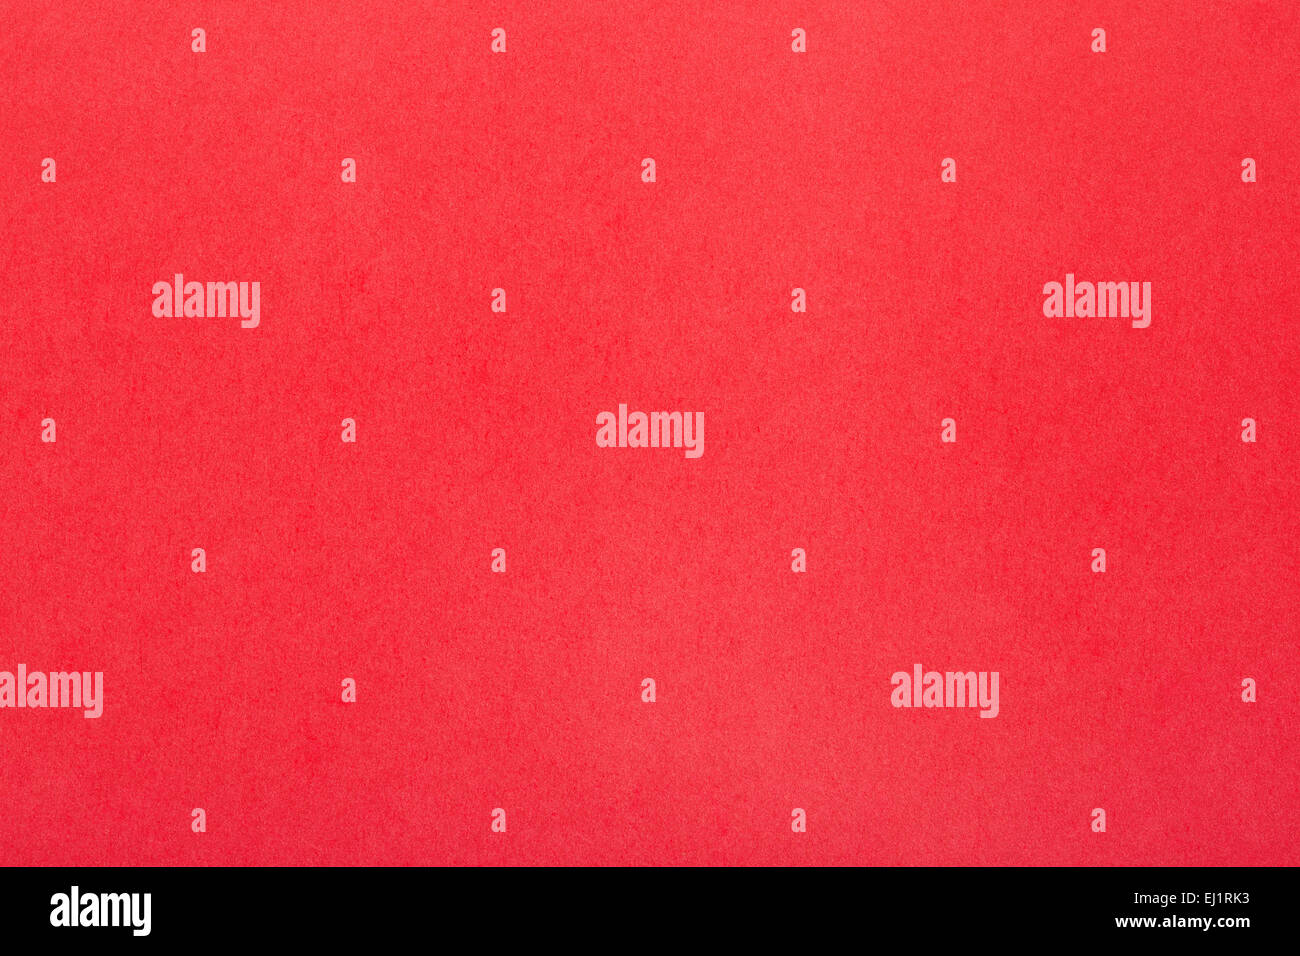 Red background, simple paper texture Stock Photo